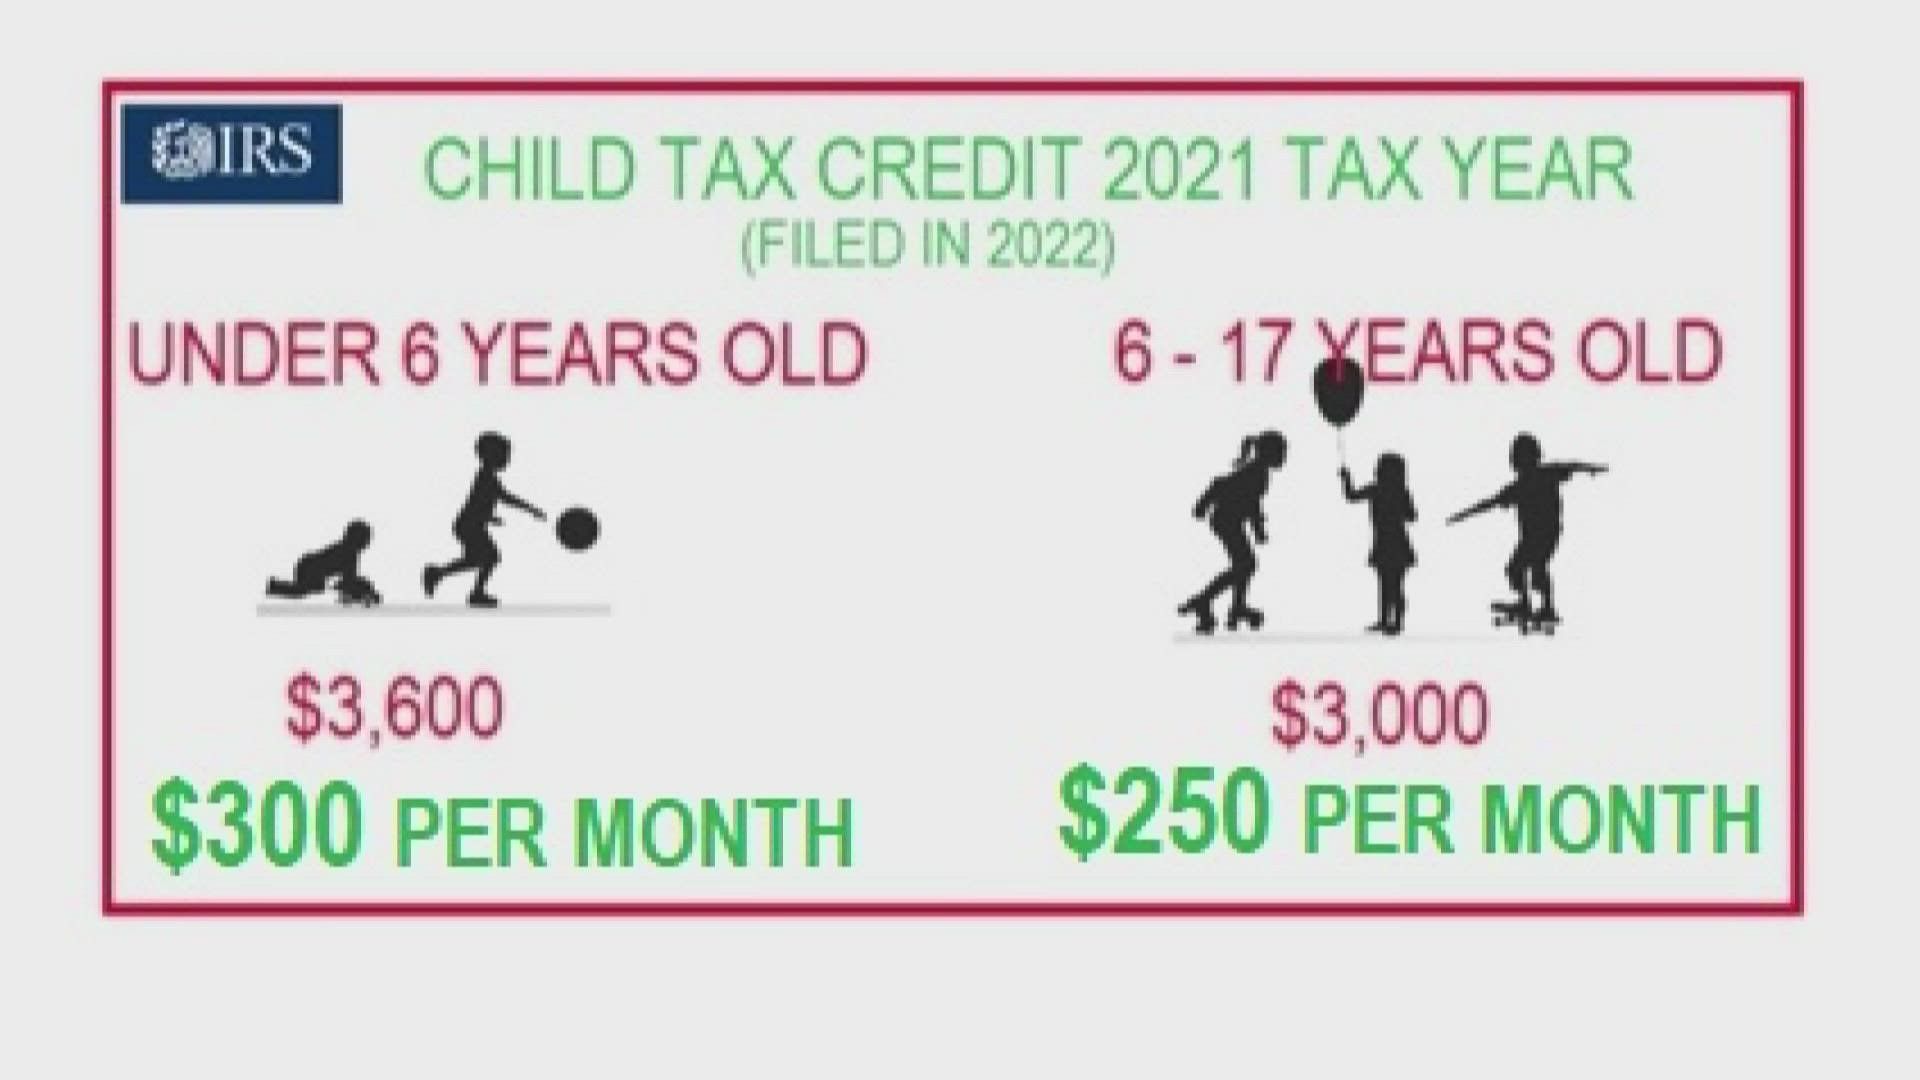 The next advanced child tax credit payments are set to go out on Sept. 15.